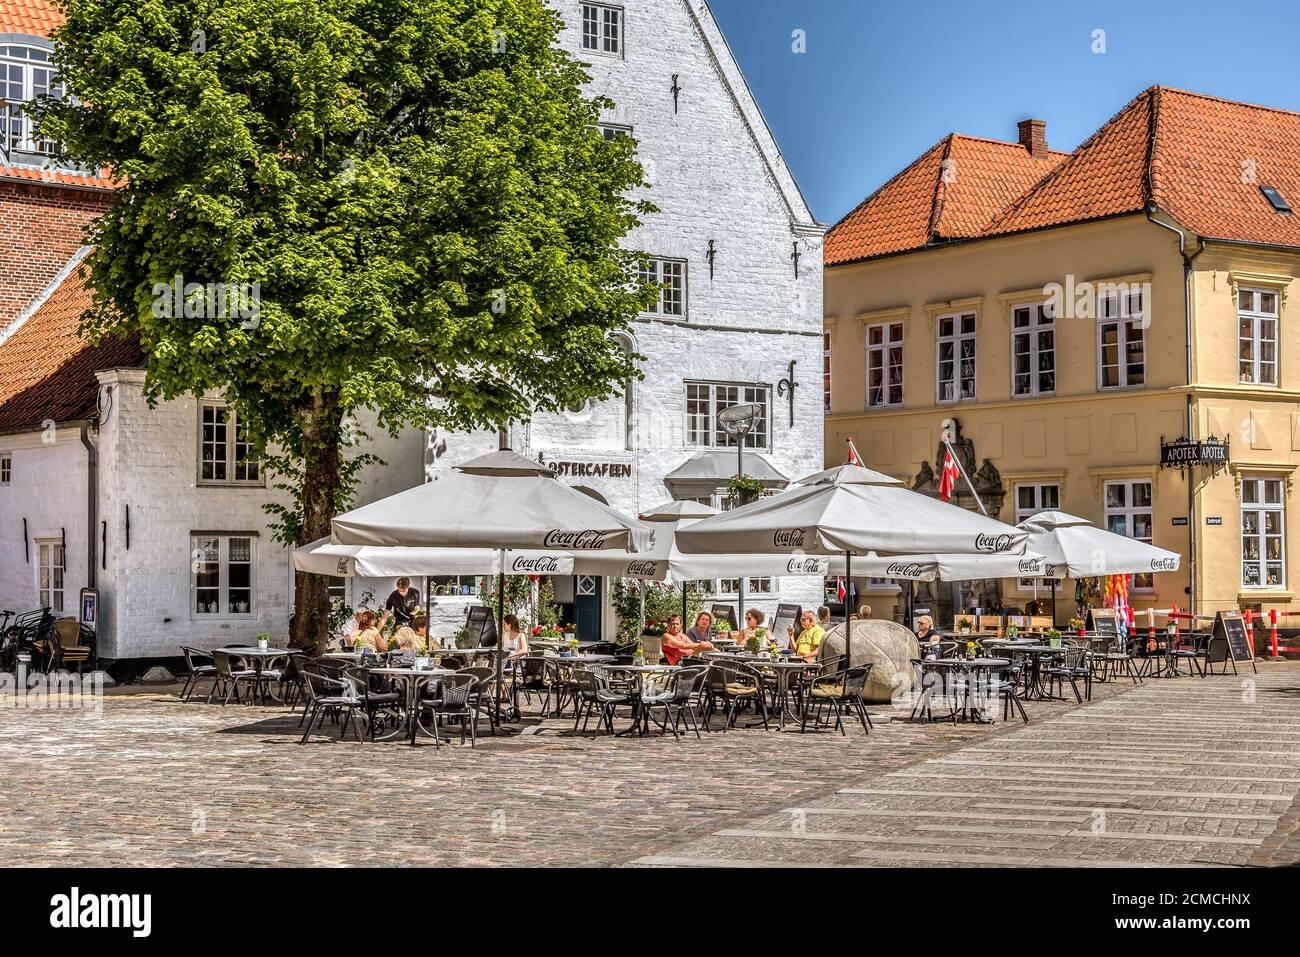 Restaurants in the sunshine with parasols at the square in Tonder, Denmark, June 1, 2020 Stock Photo